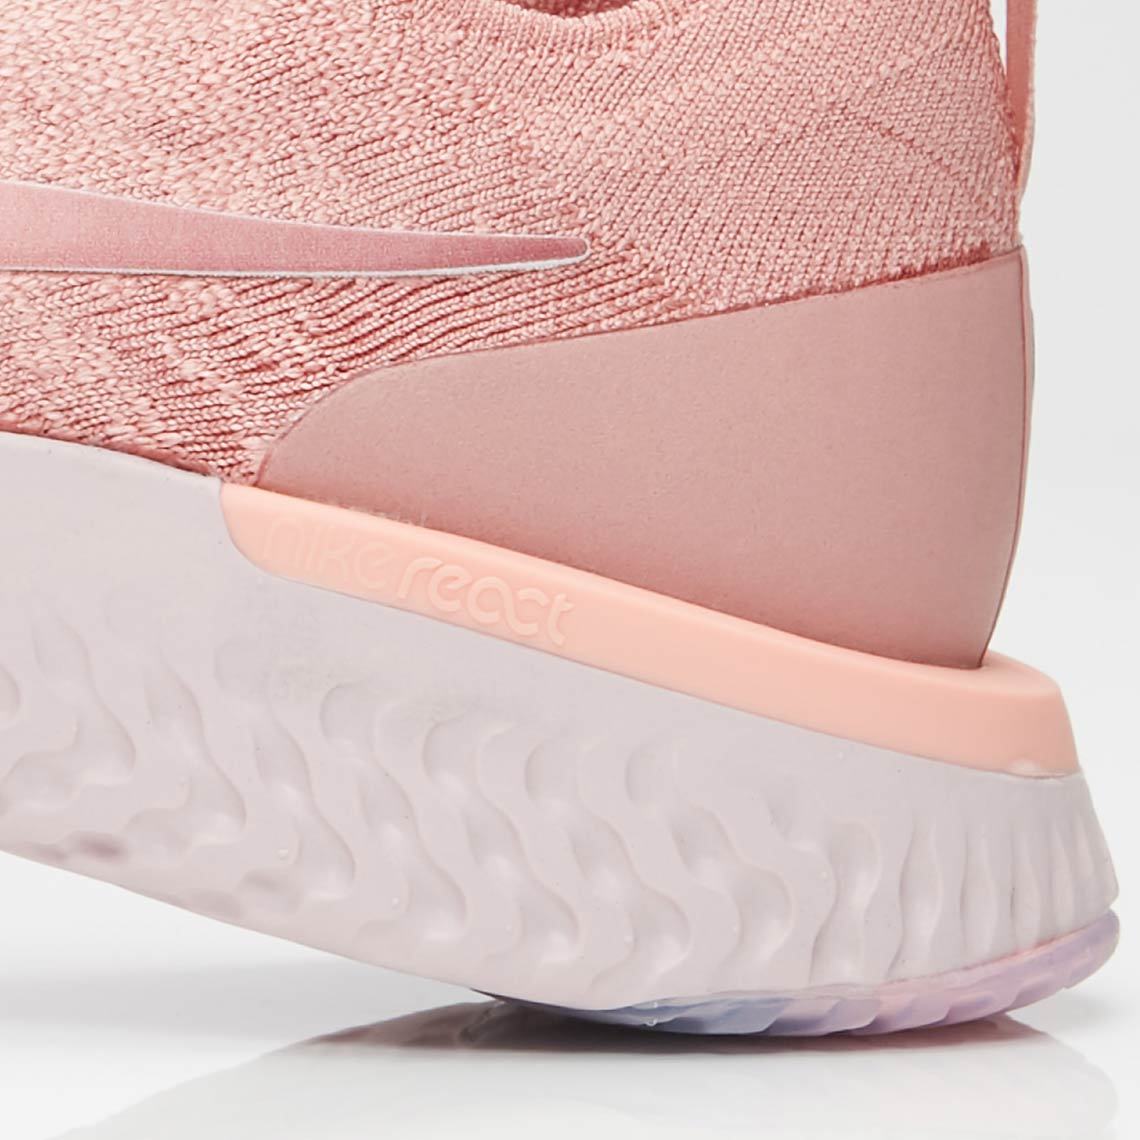 Nike Epic React Now In Rust Pink